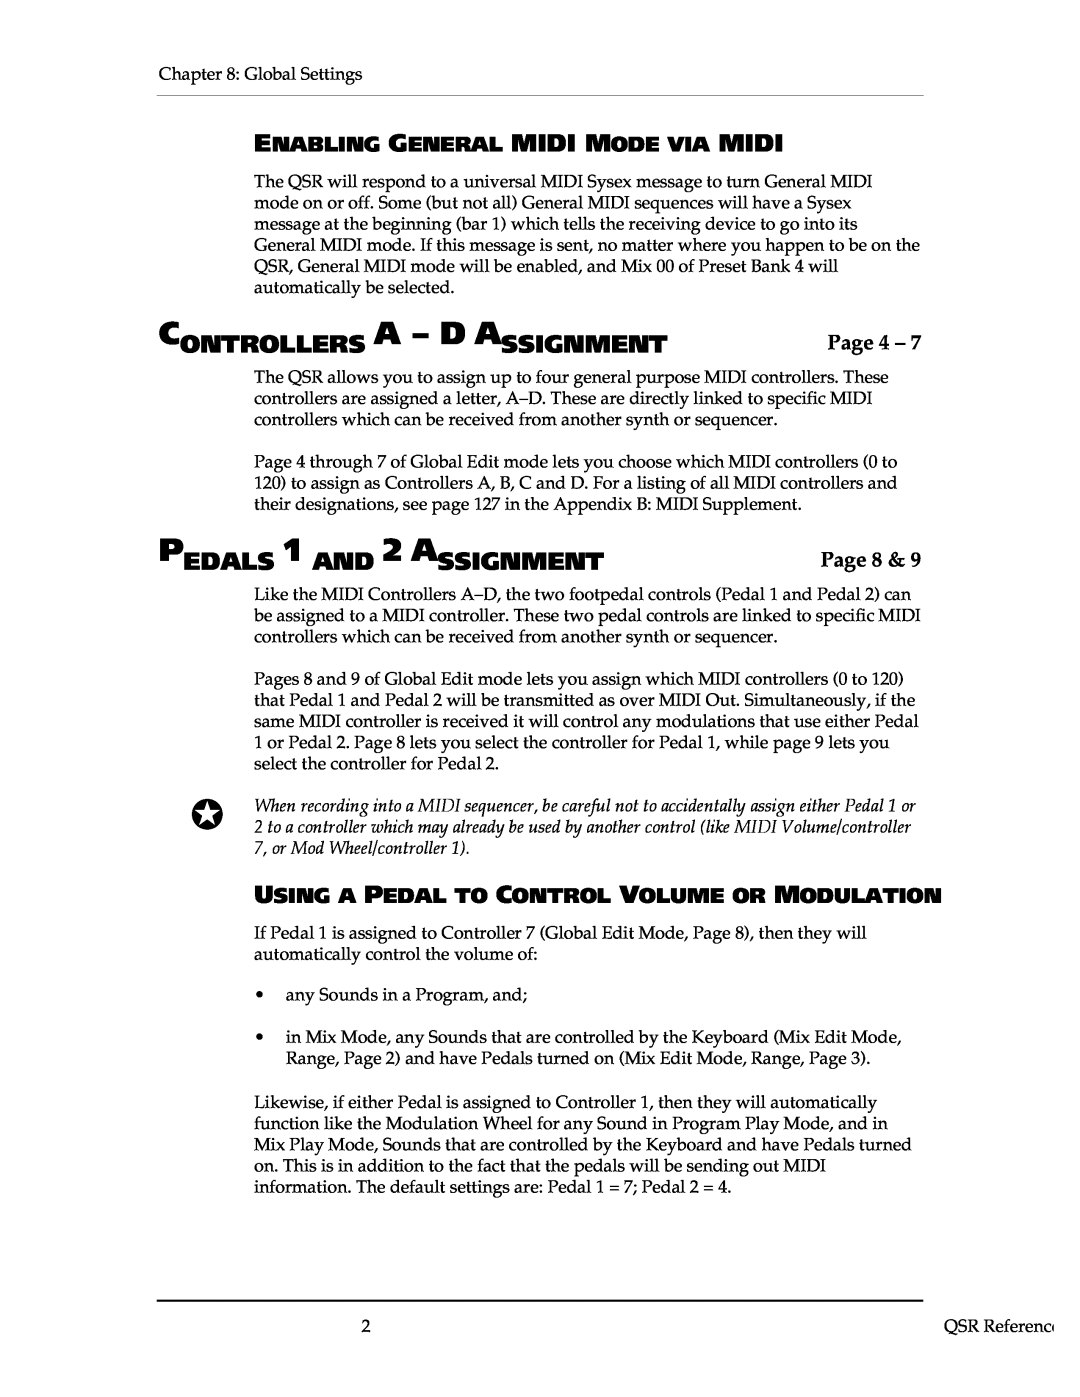 Alesis QSR 64 Controllers A - D Assignment, PEDALS 1 AND 2 ASSIGNMENT, Page 4, Page 8, Enabling General Midi Mode Via Midi 